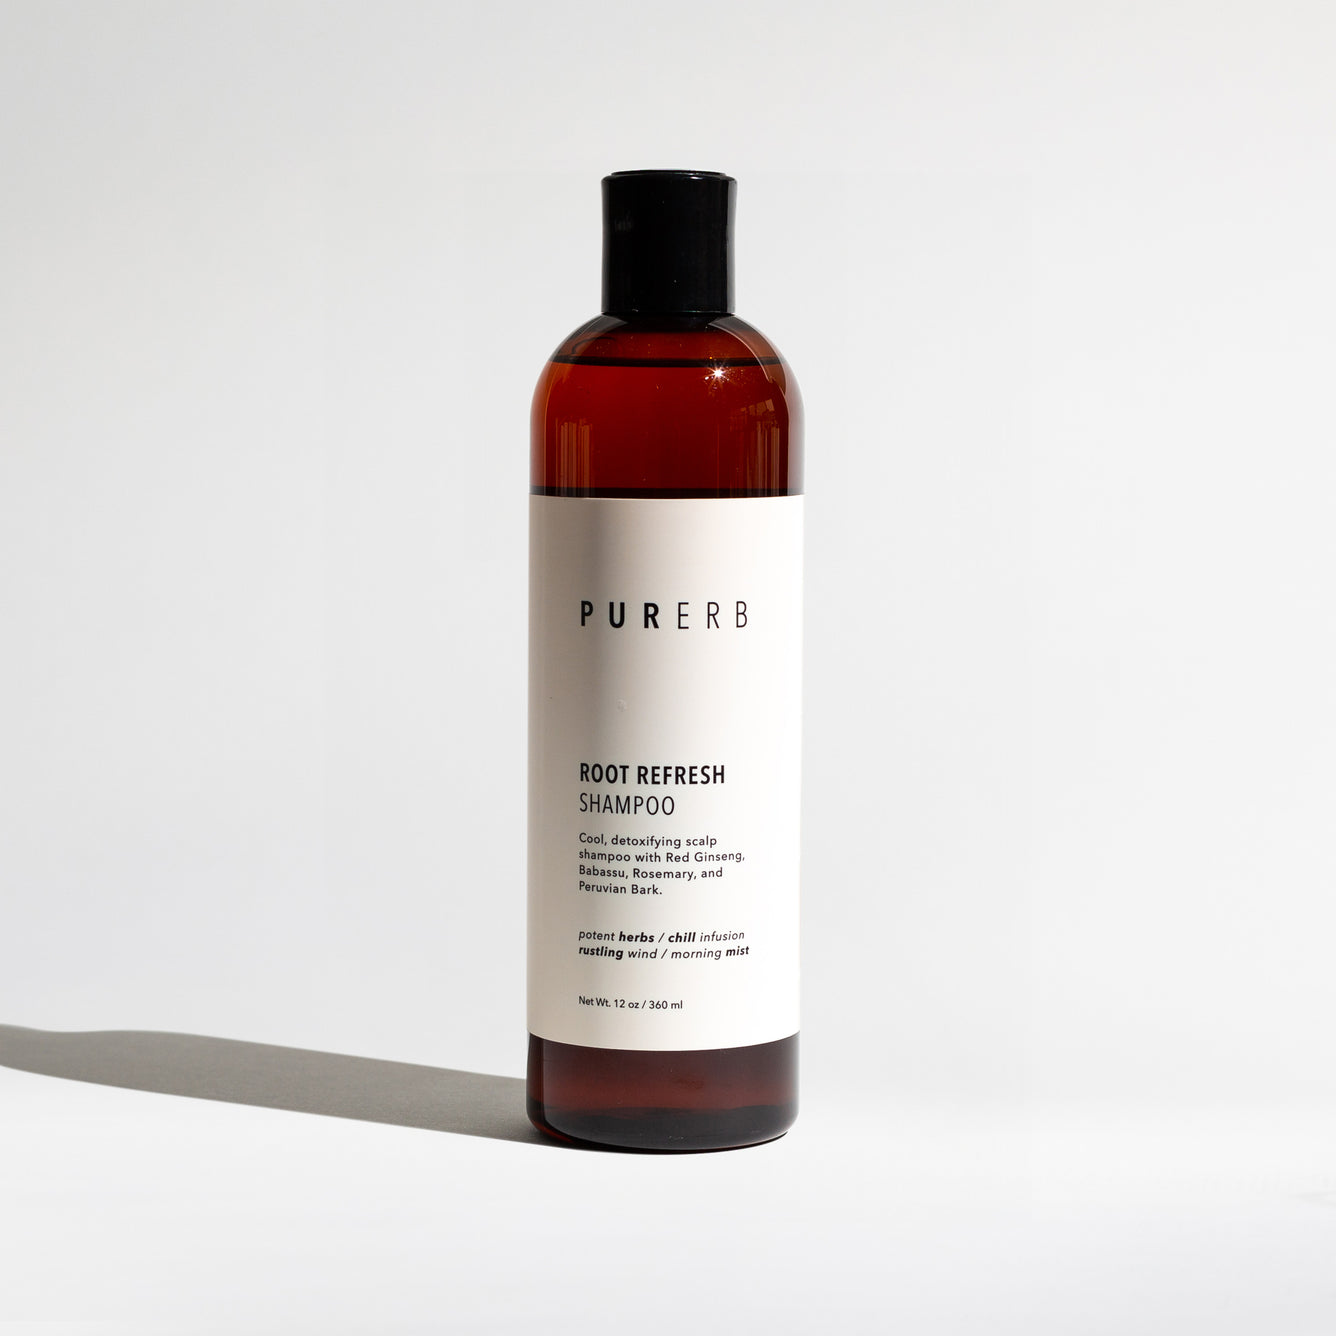 Root Refresh Shampoo bottle – A revitalizing solution for frizz-free, silky hair. This shampoo detoxifies and nourishes oily roots and tired strands with hydrating oils and botanical extracts, offering a refreshing and hair-fortifying experience with an amazing scent.